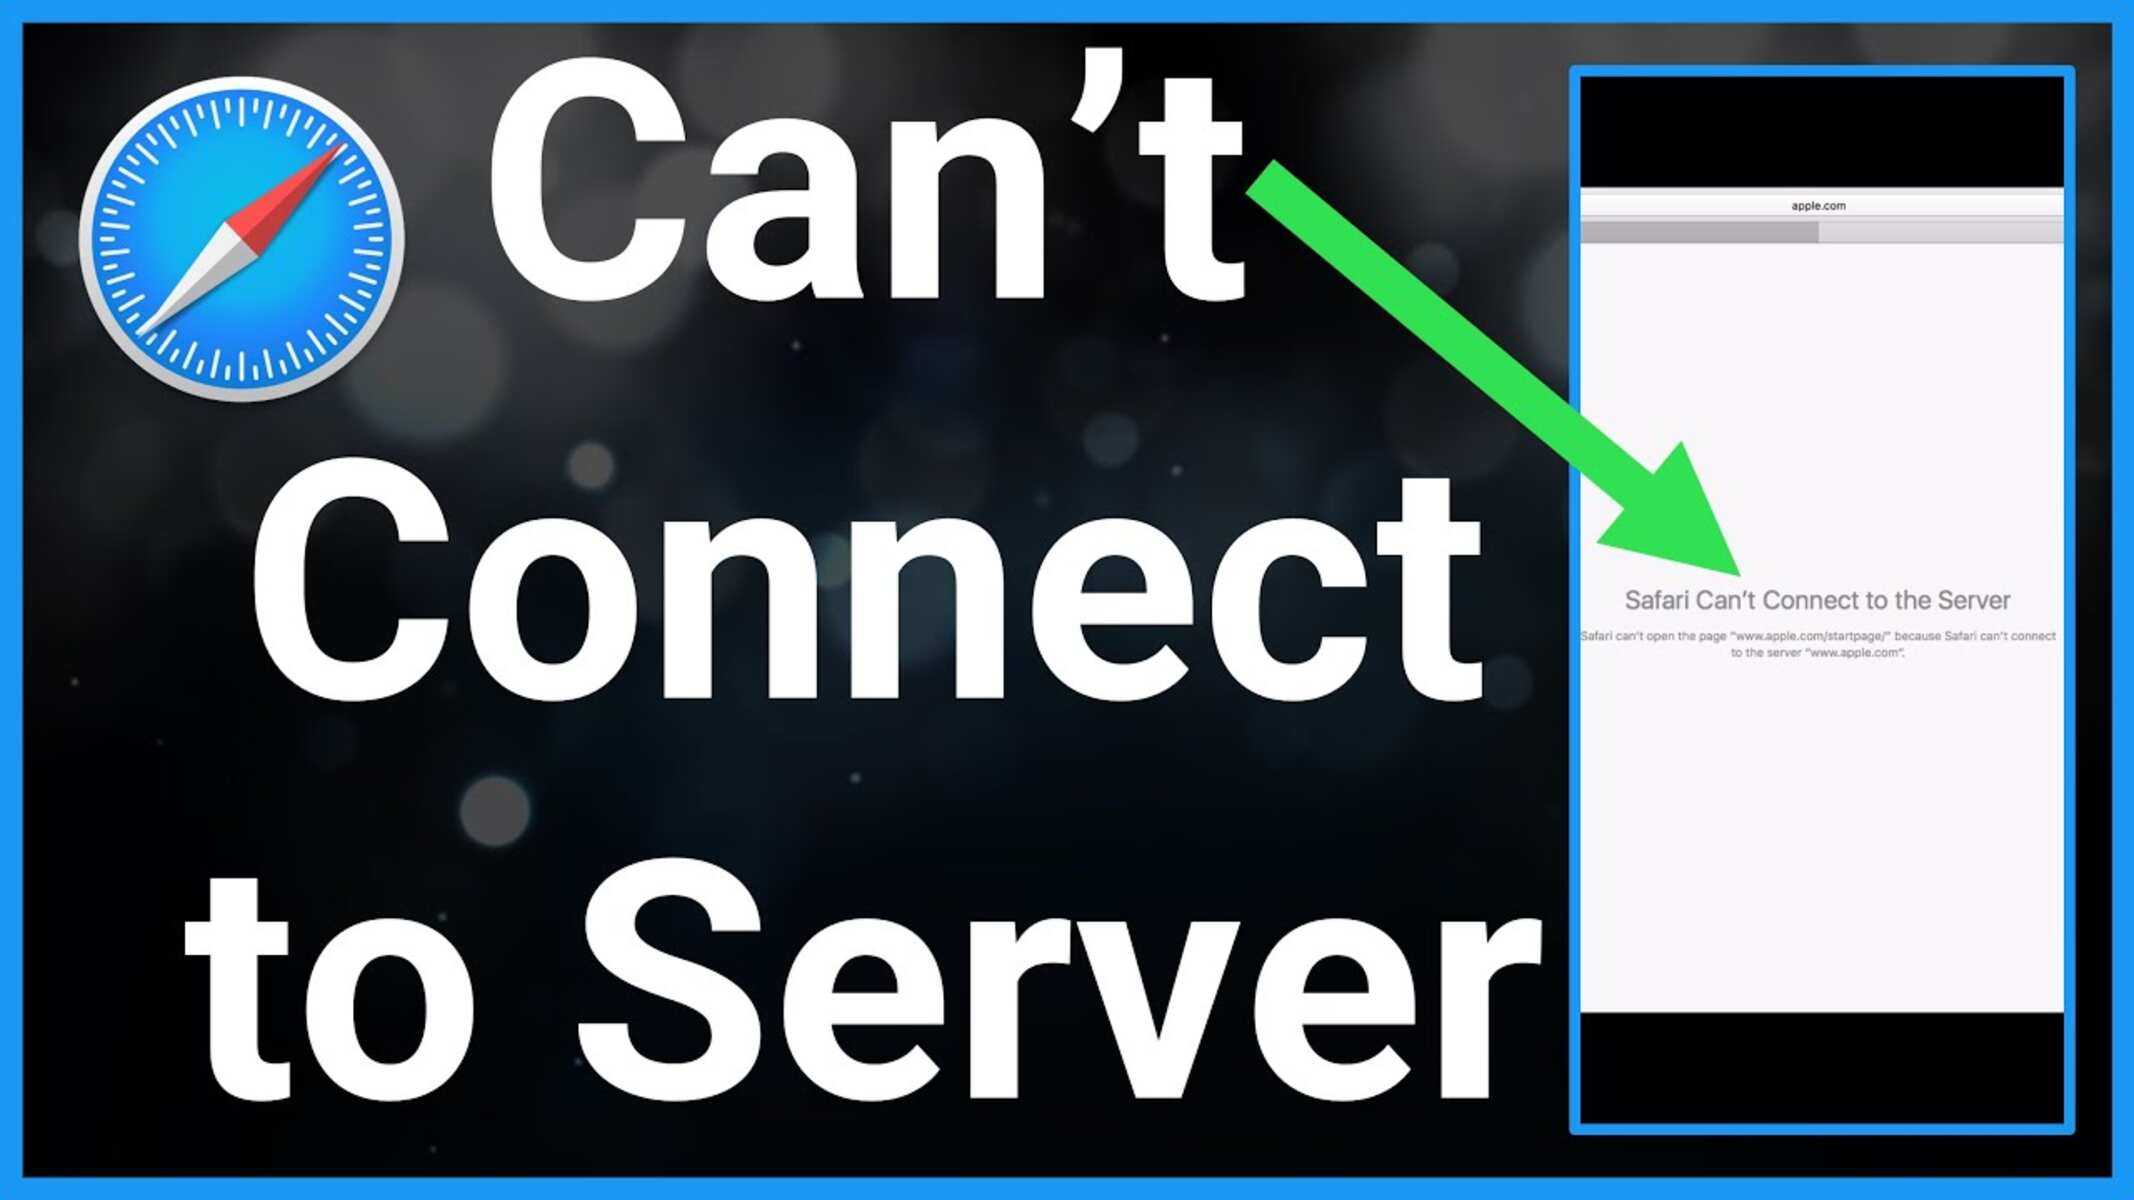 Why Does It Say Safari Cannot Connect To The Server